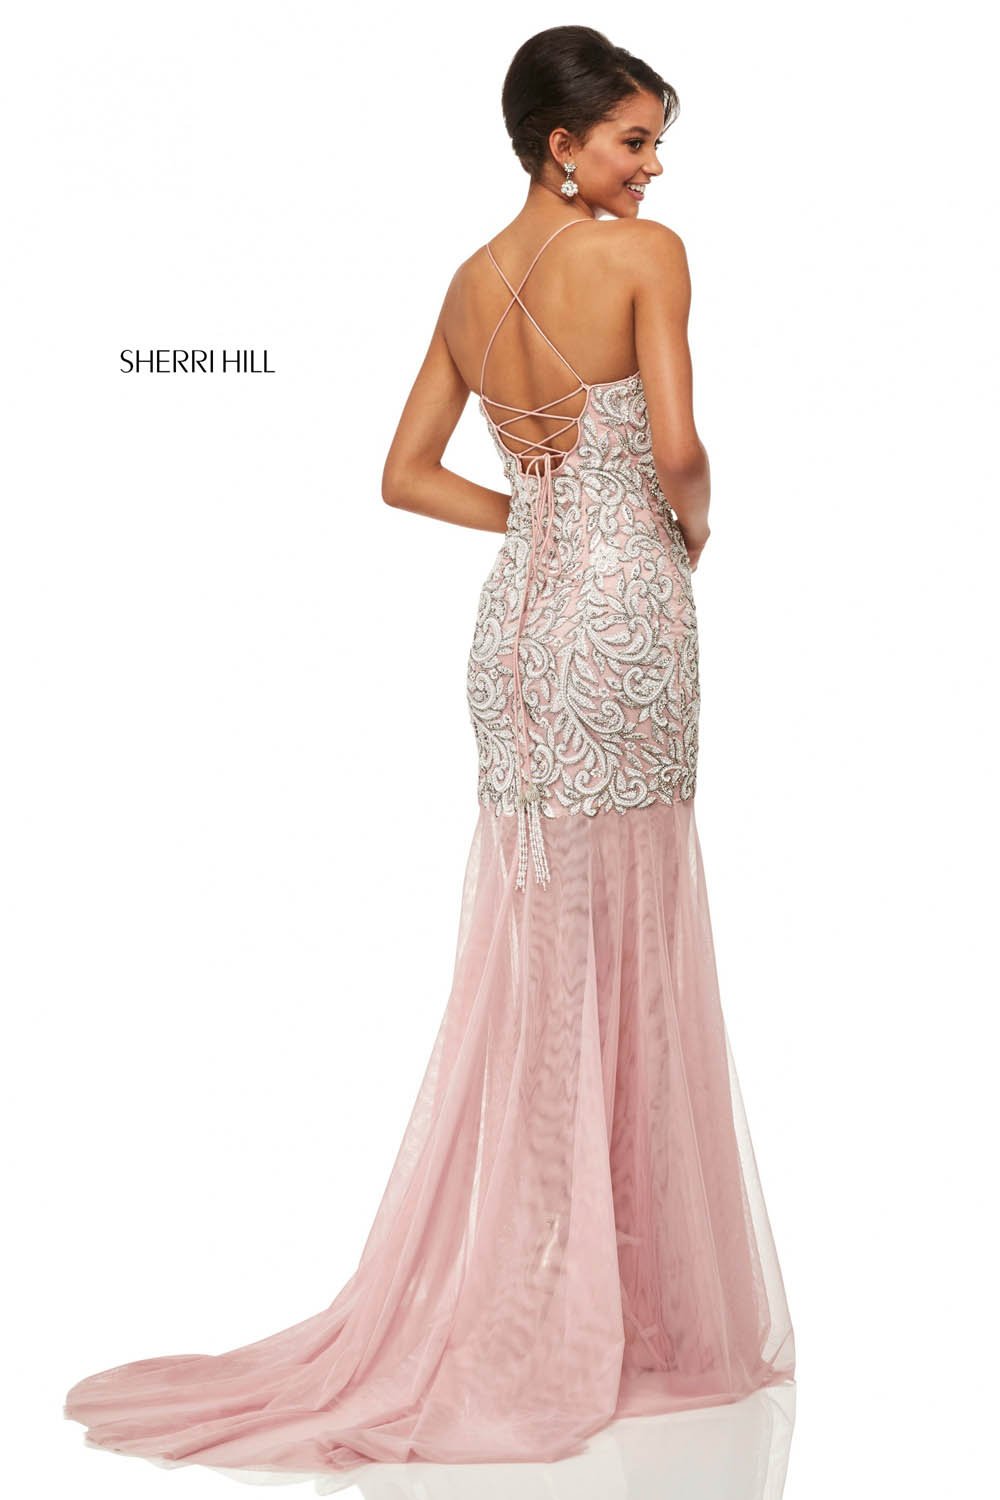 Sherri Hill 52678 dress images in these colors: Light Pink.